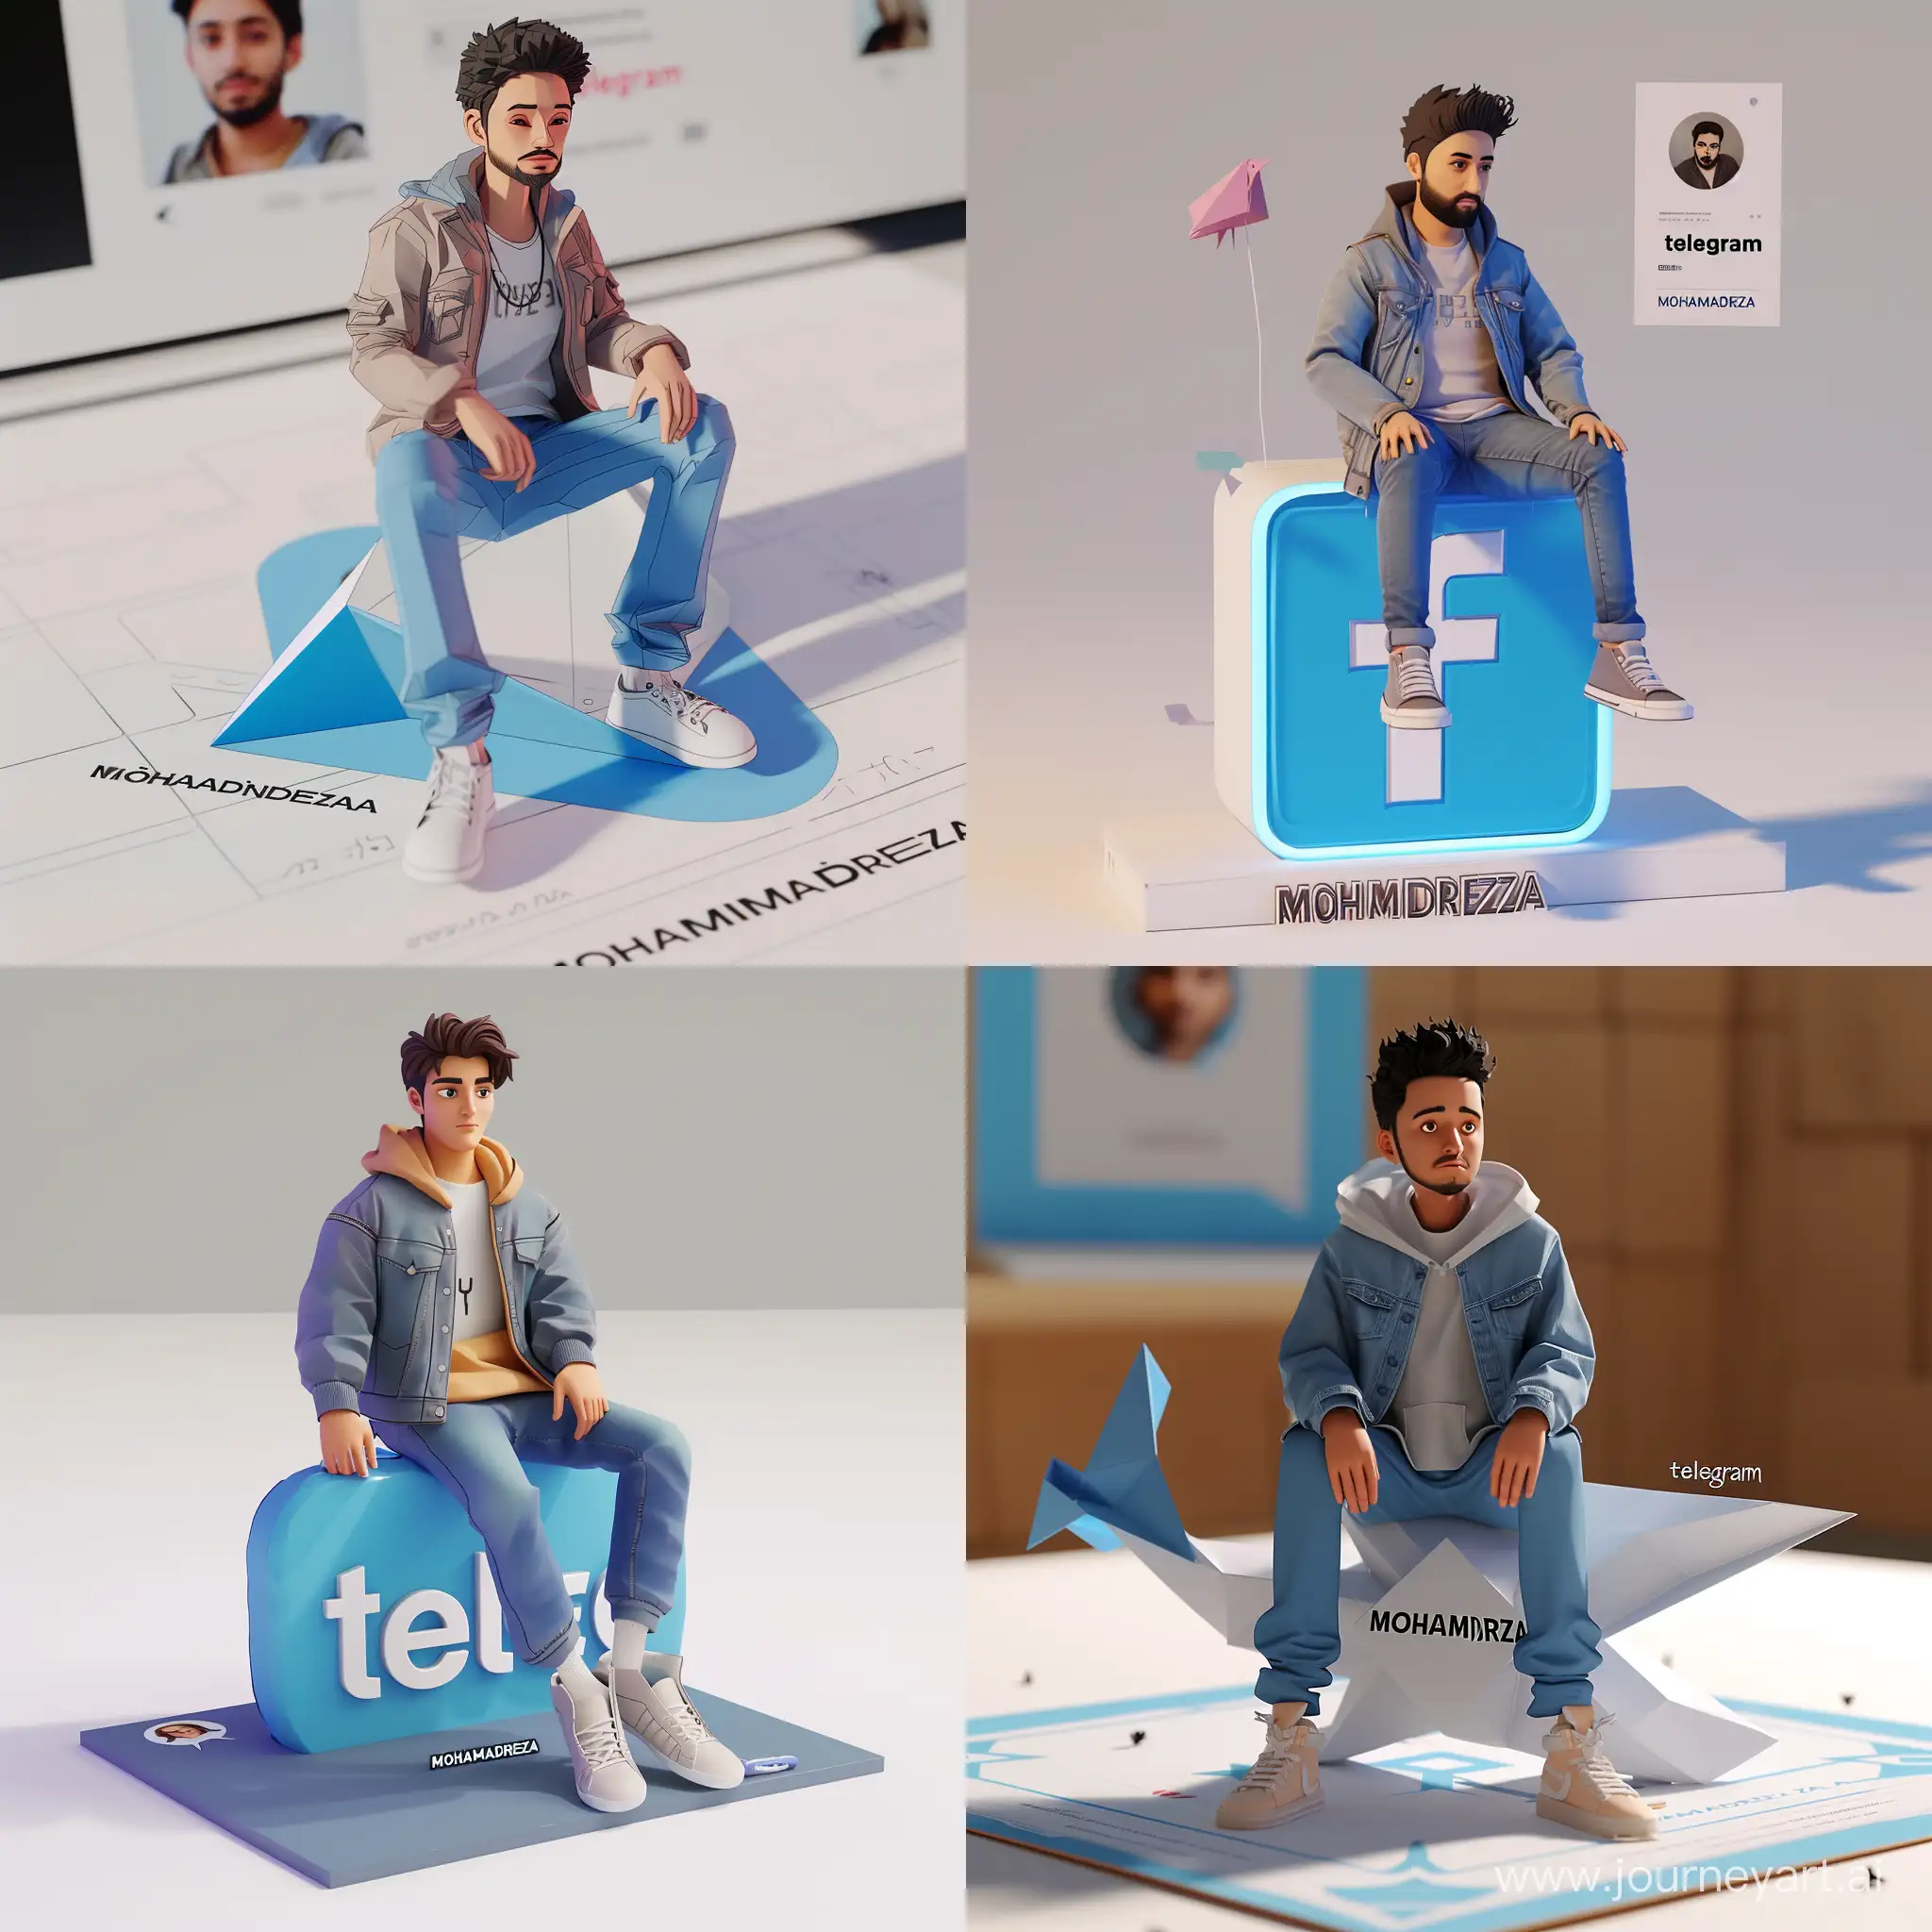 Create a 3D illustration of an animated character sitting casually on top of a social media logo”telegram”. The Character must wear casual modern clothing such as jeans jacket and sneakers shoes. The background of the image is a social media profile page with a user name “MOHAMMADREZA” And a profile picture that match.